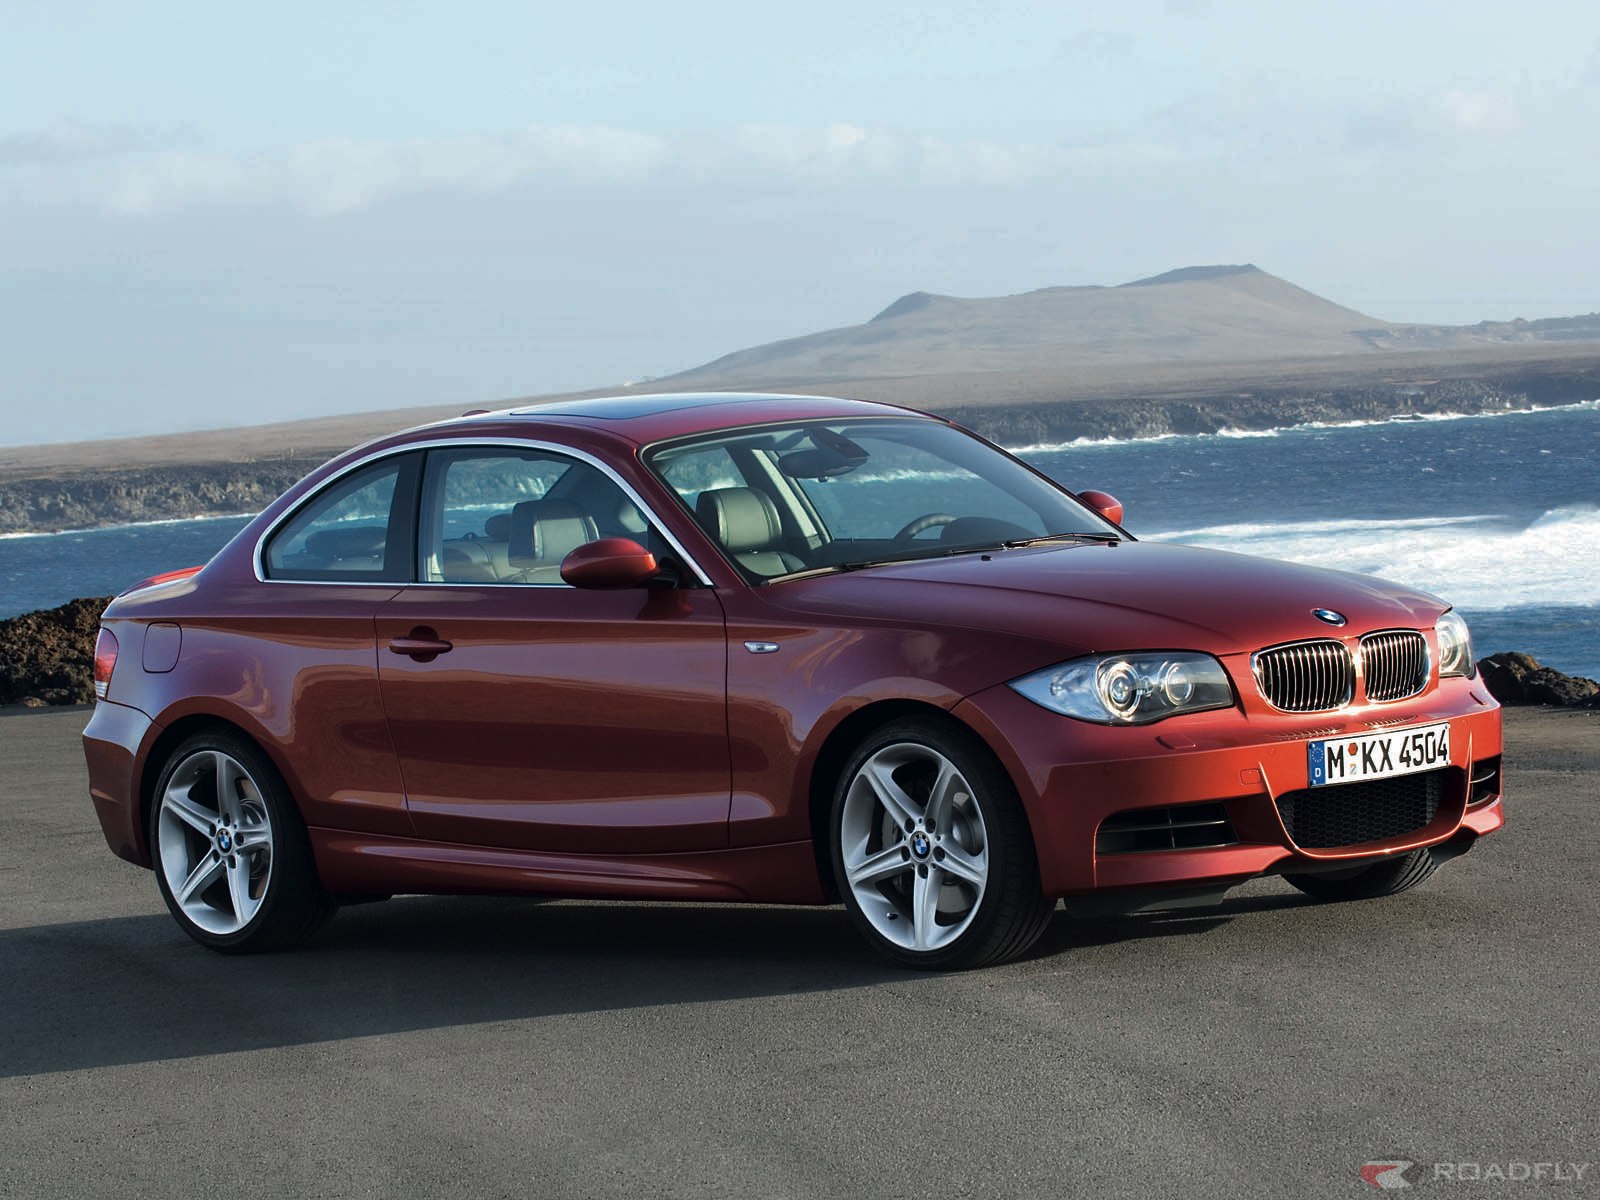 2008-bmw-1-series-coupe.jpg. More images